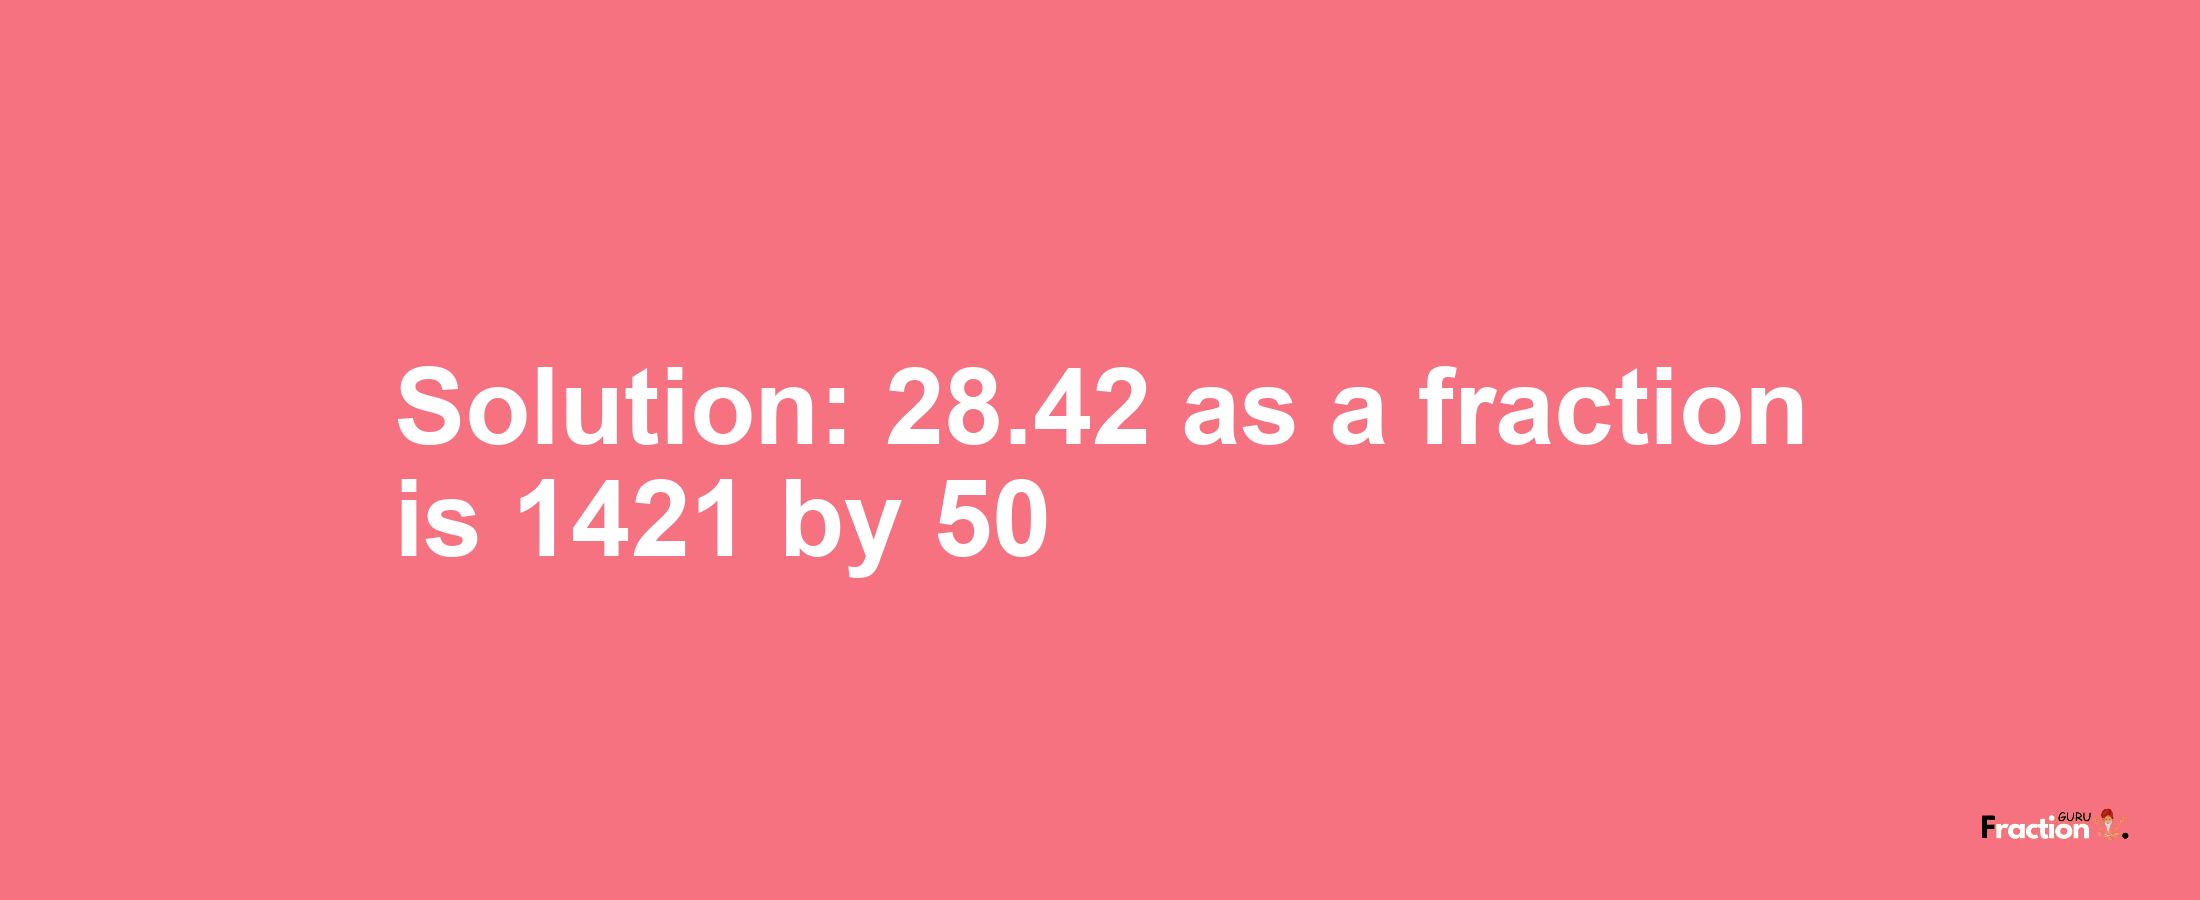 Solution:28.42 as a fraction is 1421/50